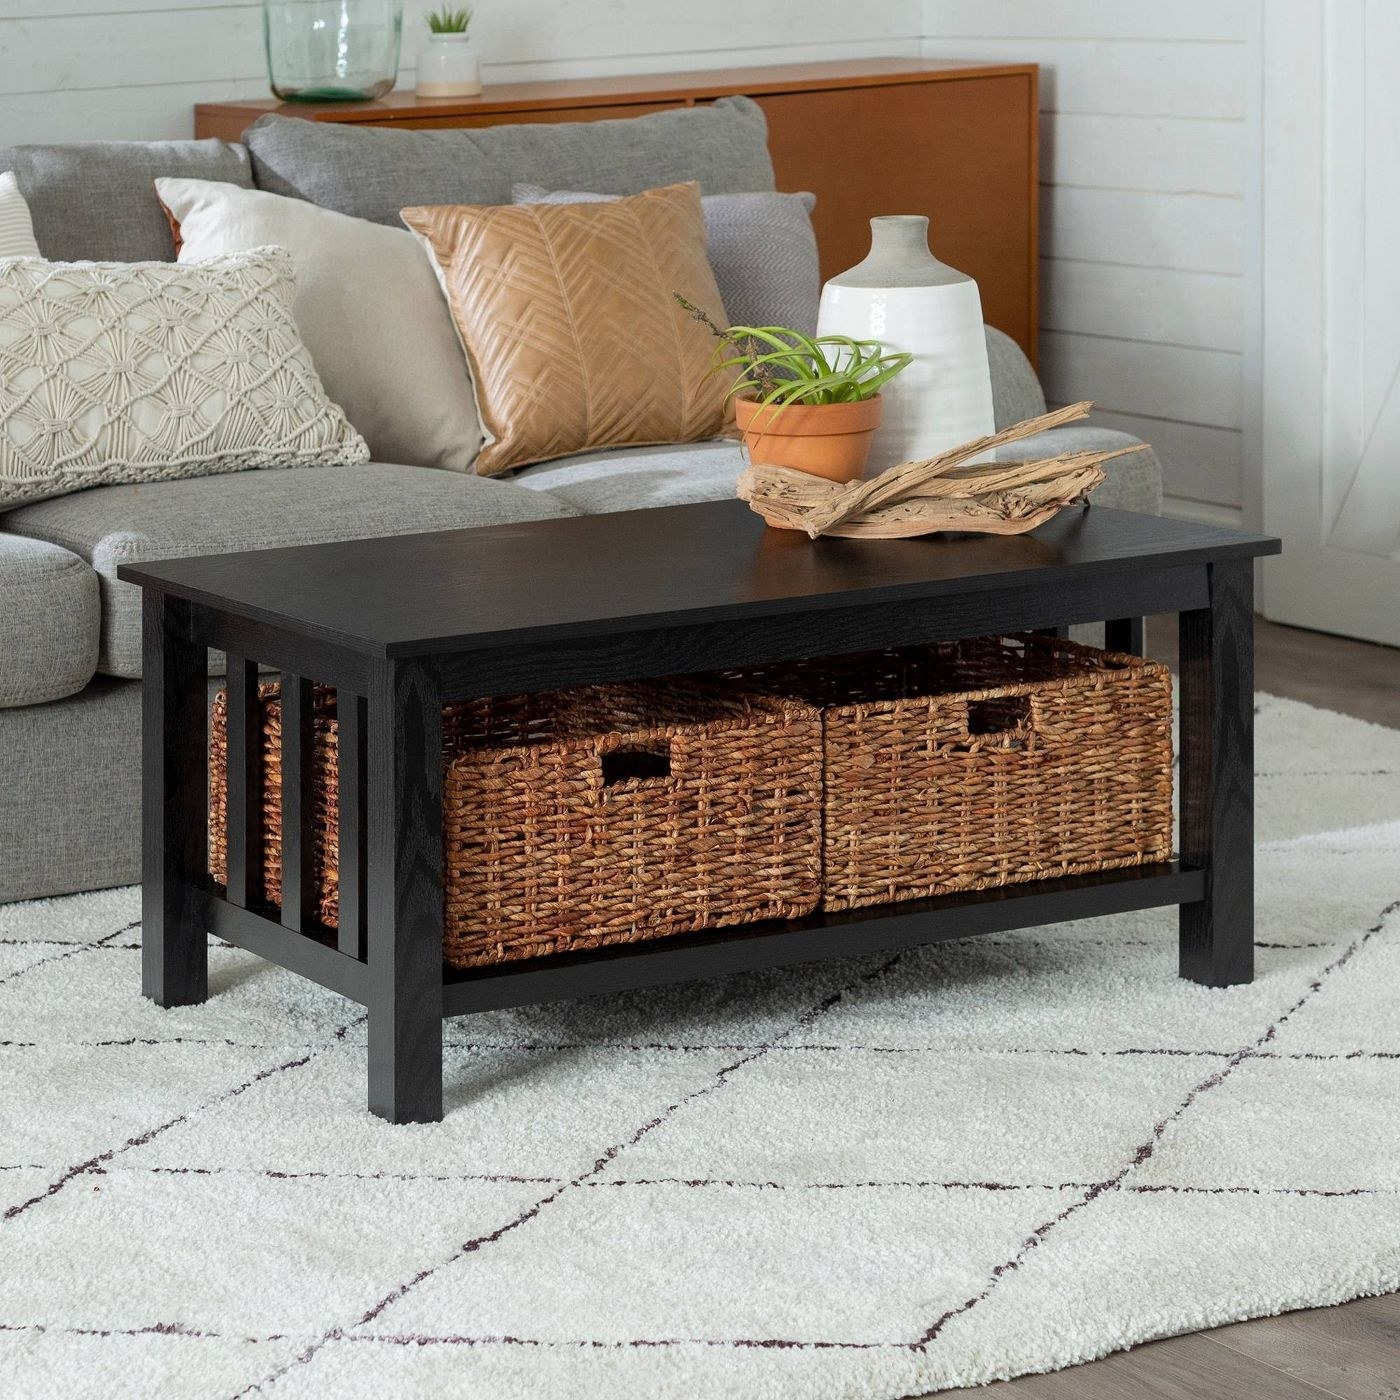 The coffee table pictured in black